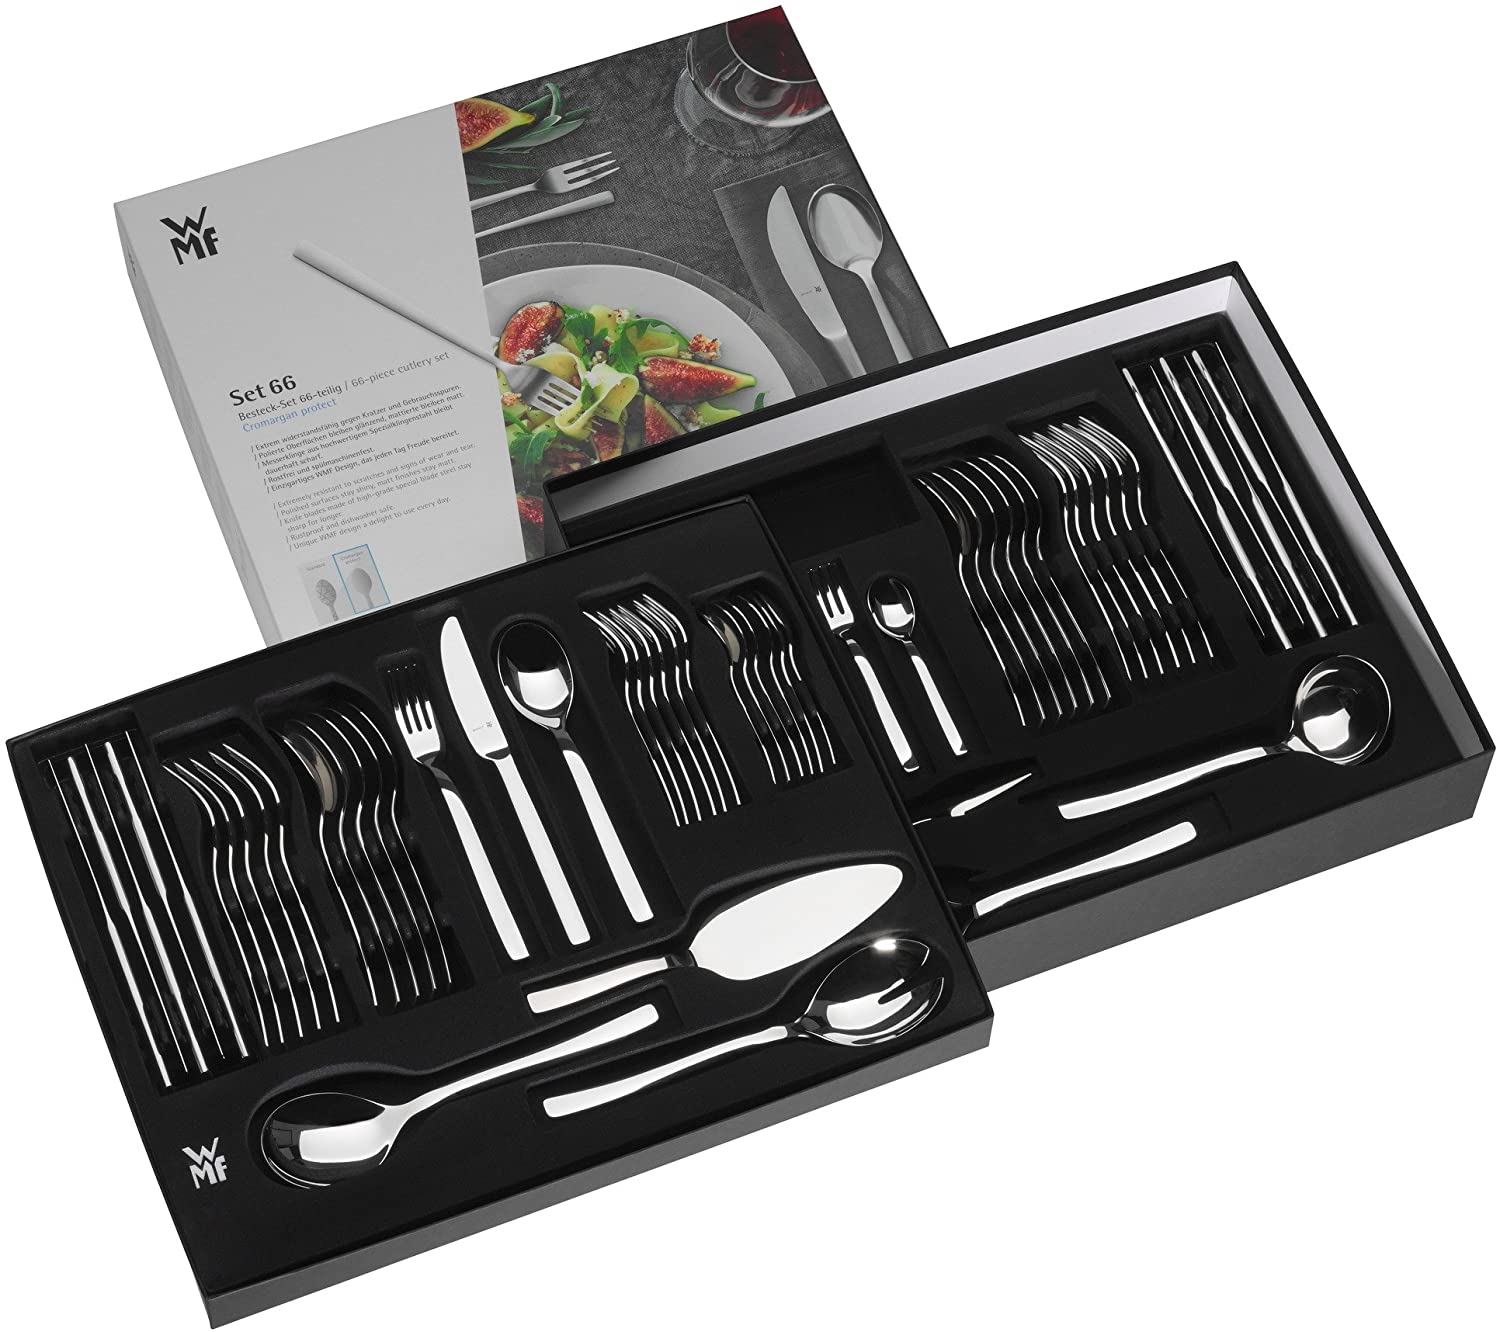 WMF Atic Cutlery Set, 12 People, 66 Pieces, 60 Pieces with Serving Cutlery, Monobloc Knife, Polished Cromargan Protect Stainless Steel, Glossy, Scratch-Resistant, Dishwasher Safe